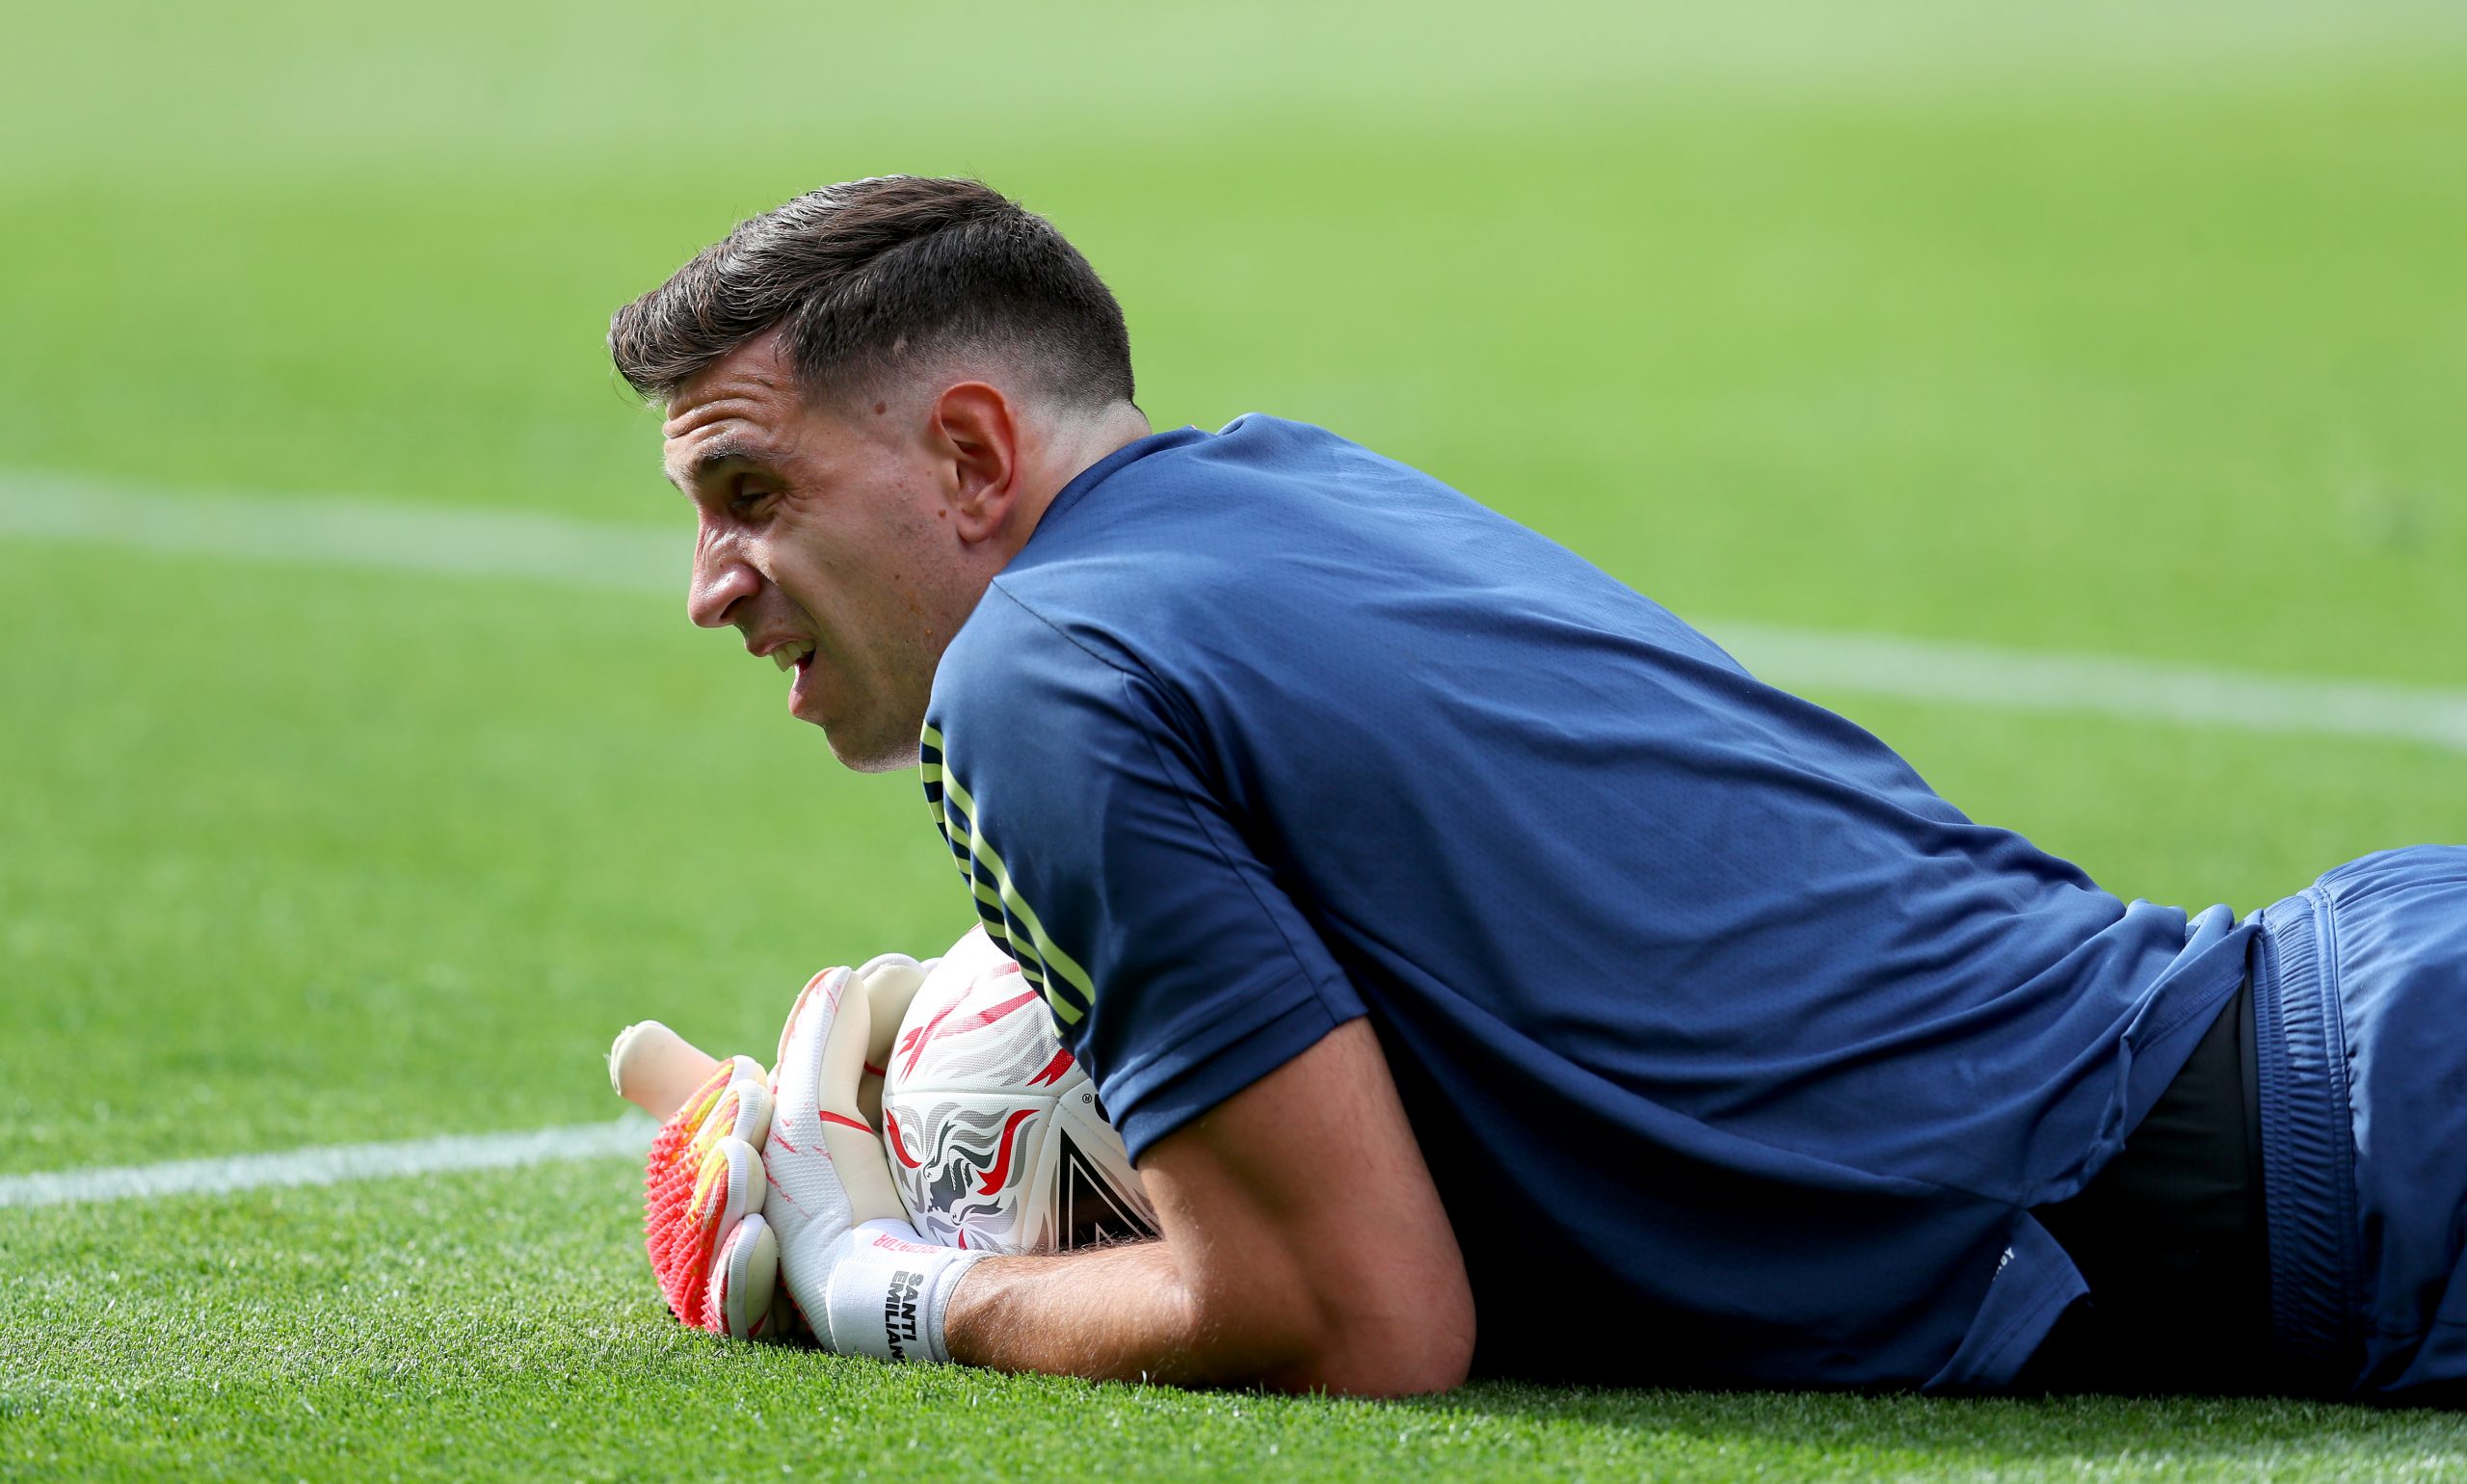 Ian Wright full of praise for Aston Villa keeper Martinez who is seen in the photo